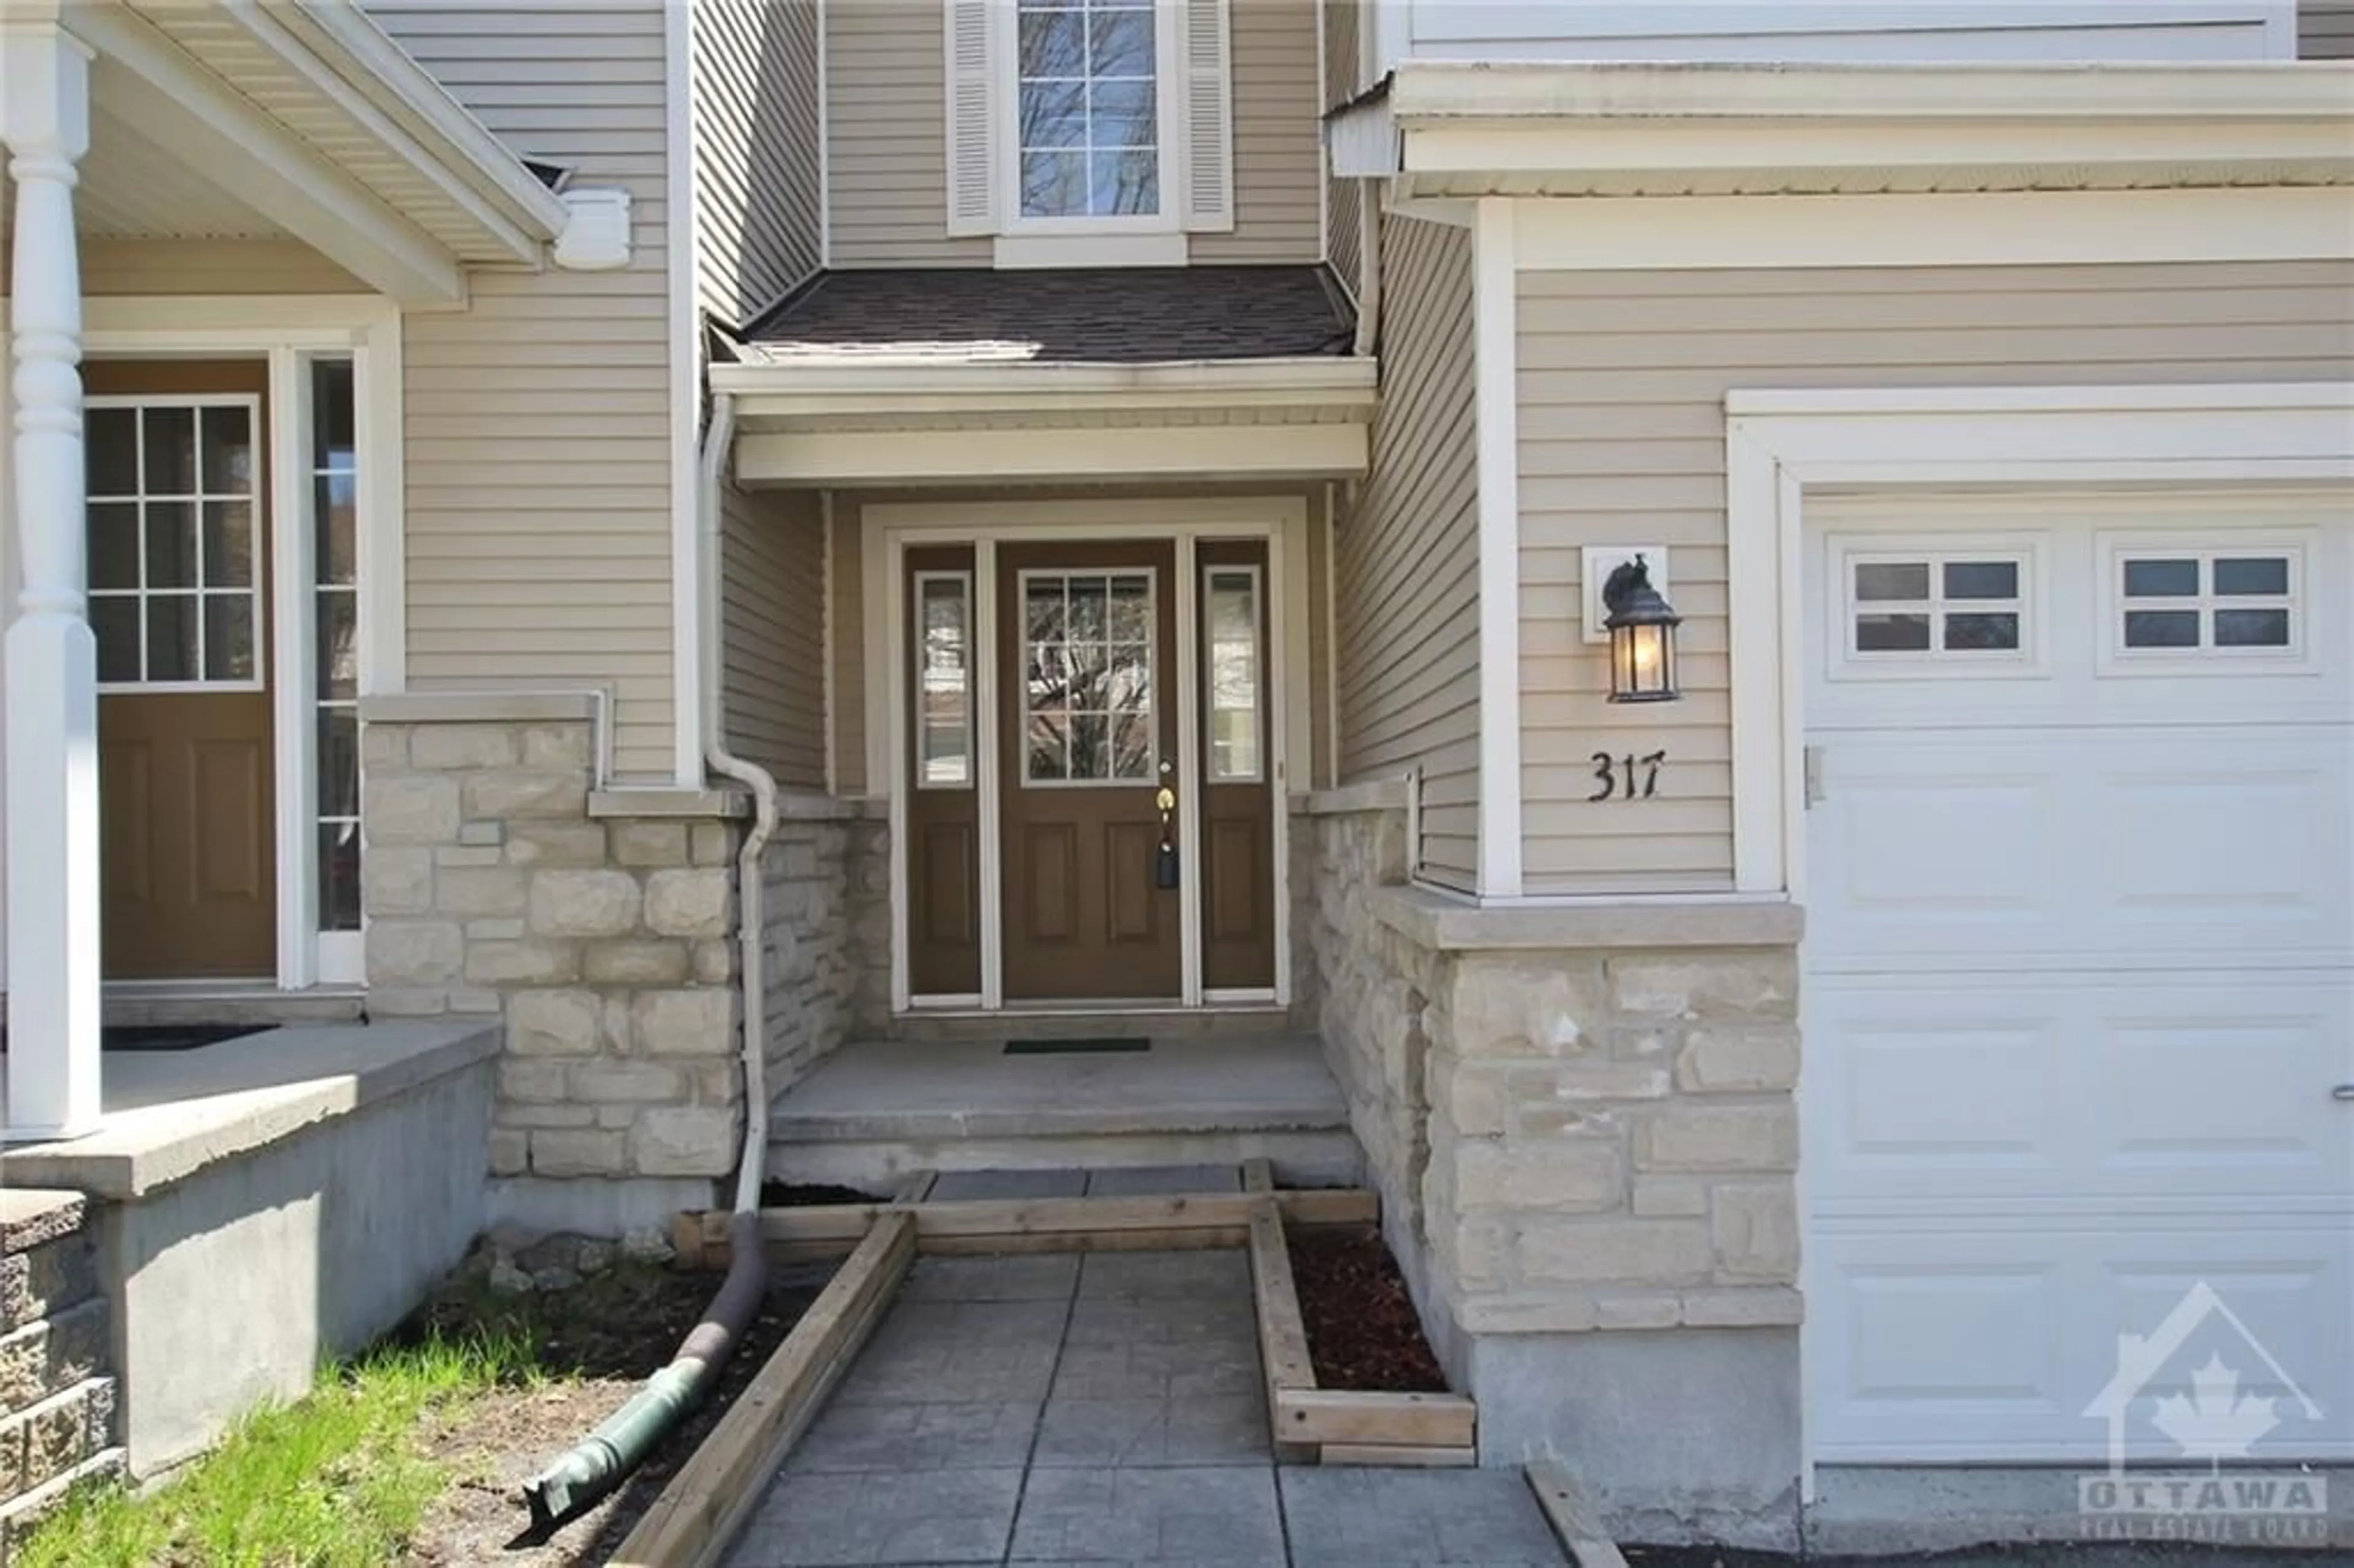 A pic from exterior of the house or condo for 317 SILBRASS Pvt, Ottawa Ontario K2J 5M5